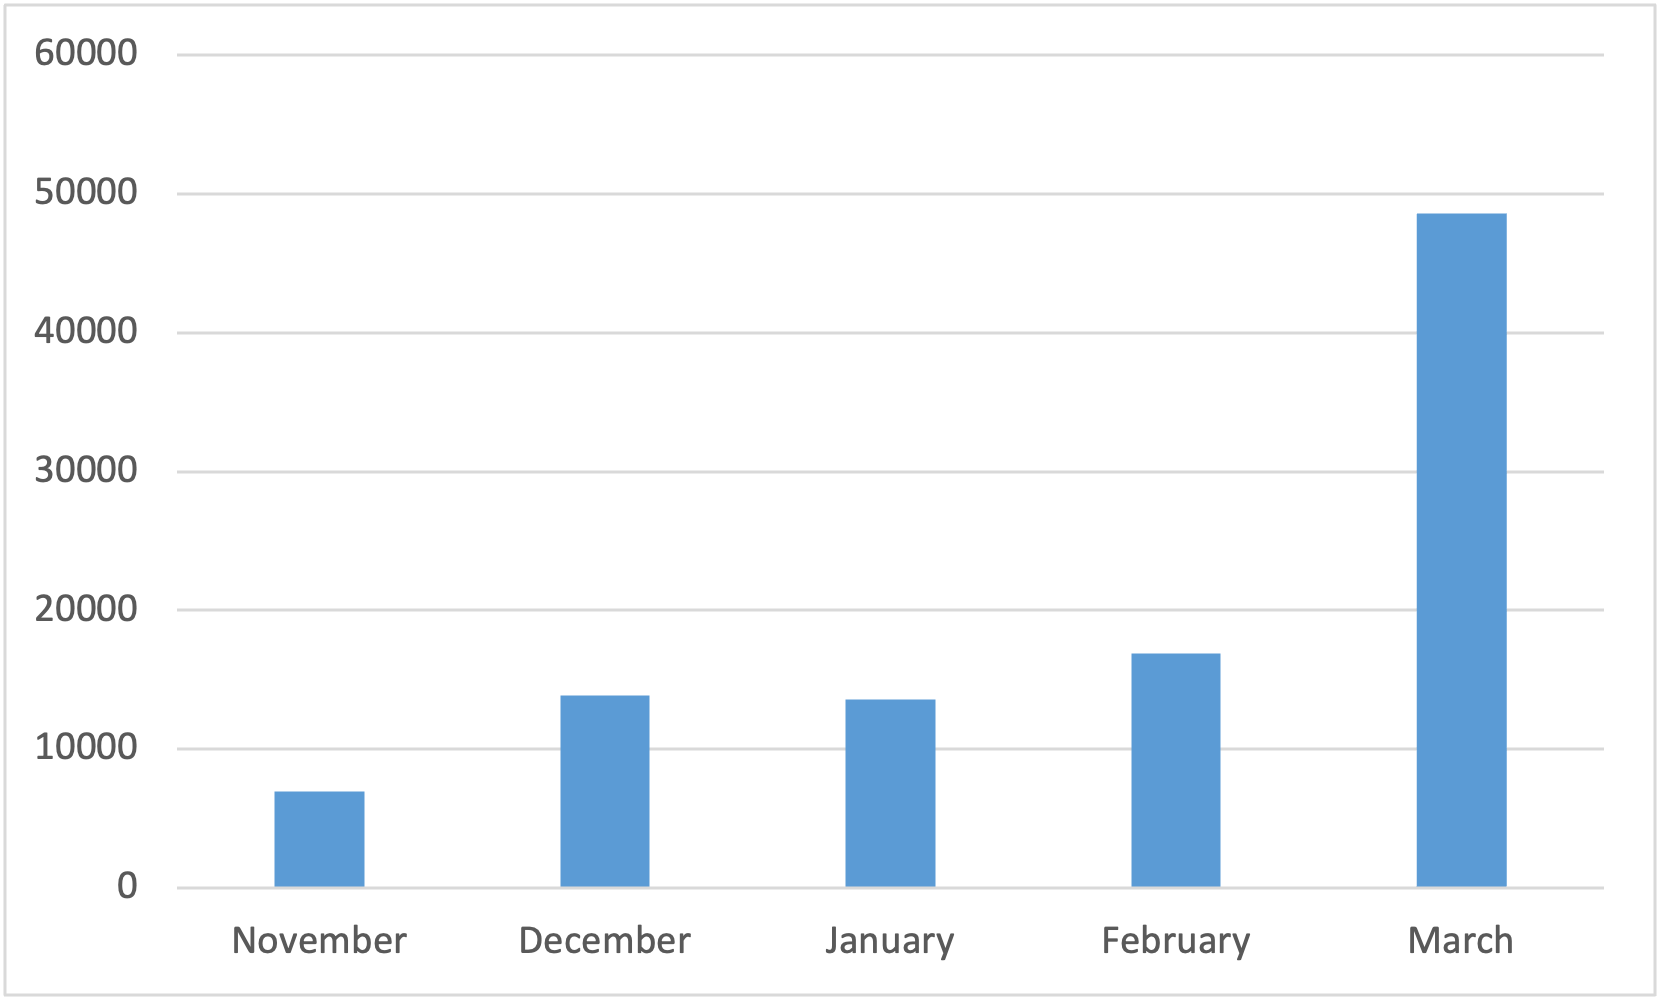 Dynamics of the number of Emotet detections, November 2021–March 2022